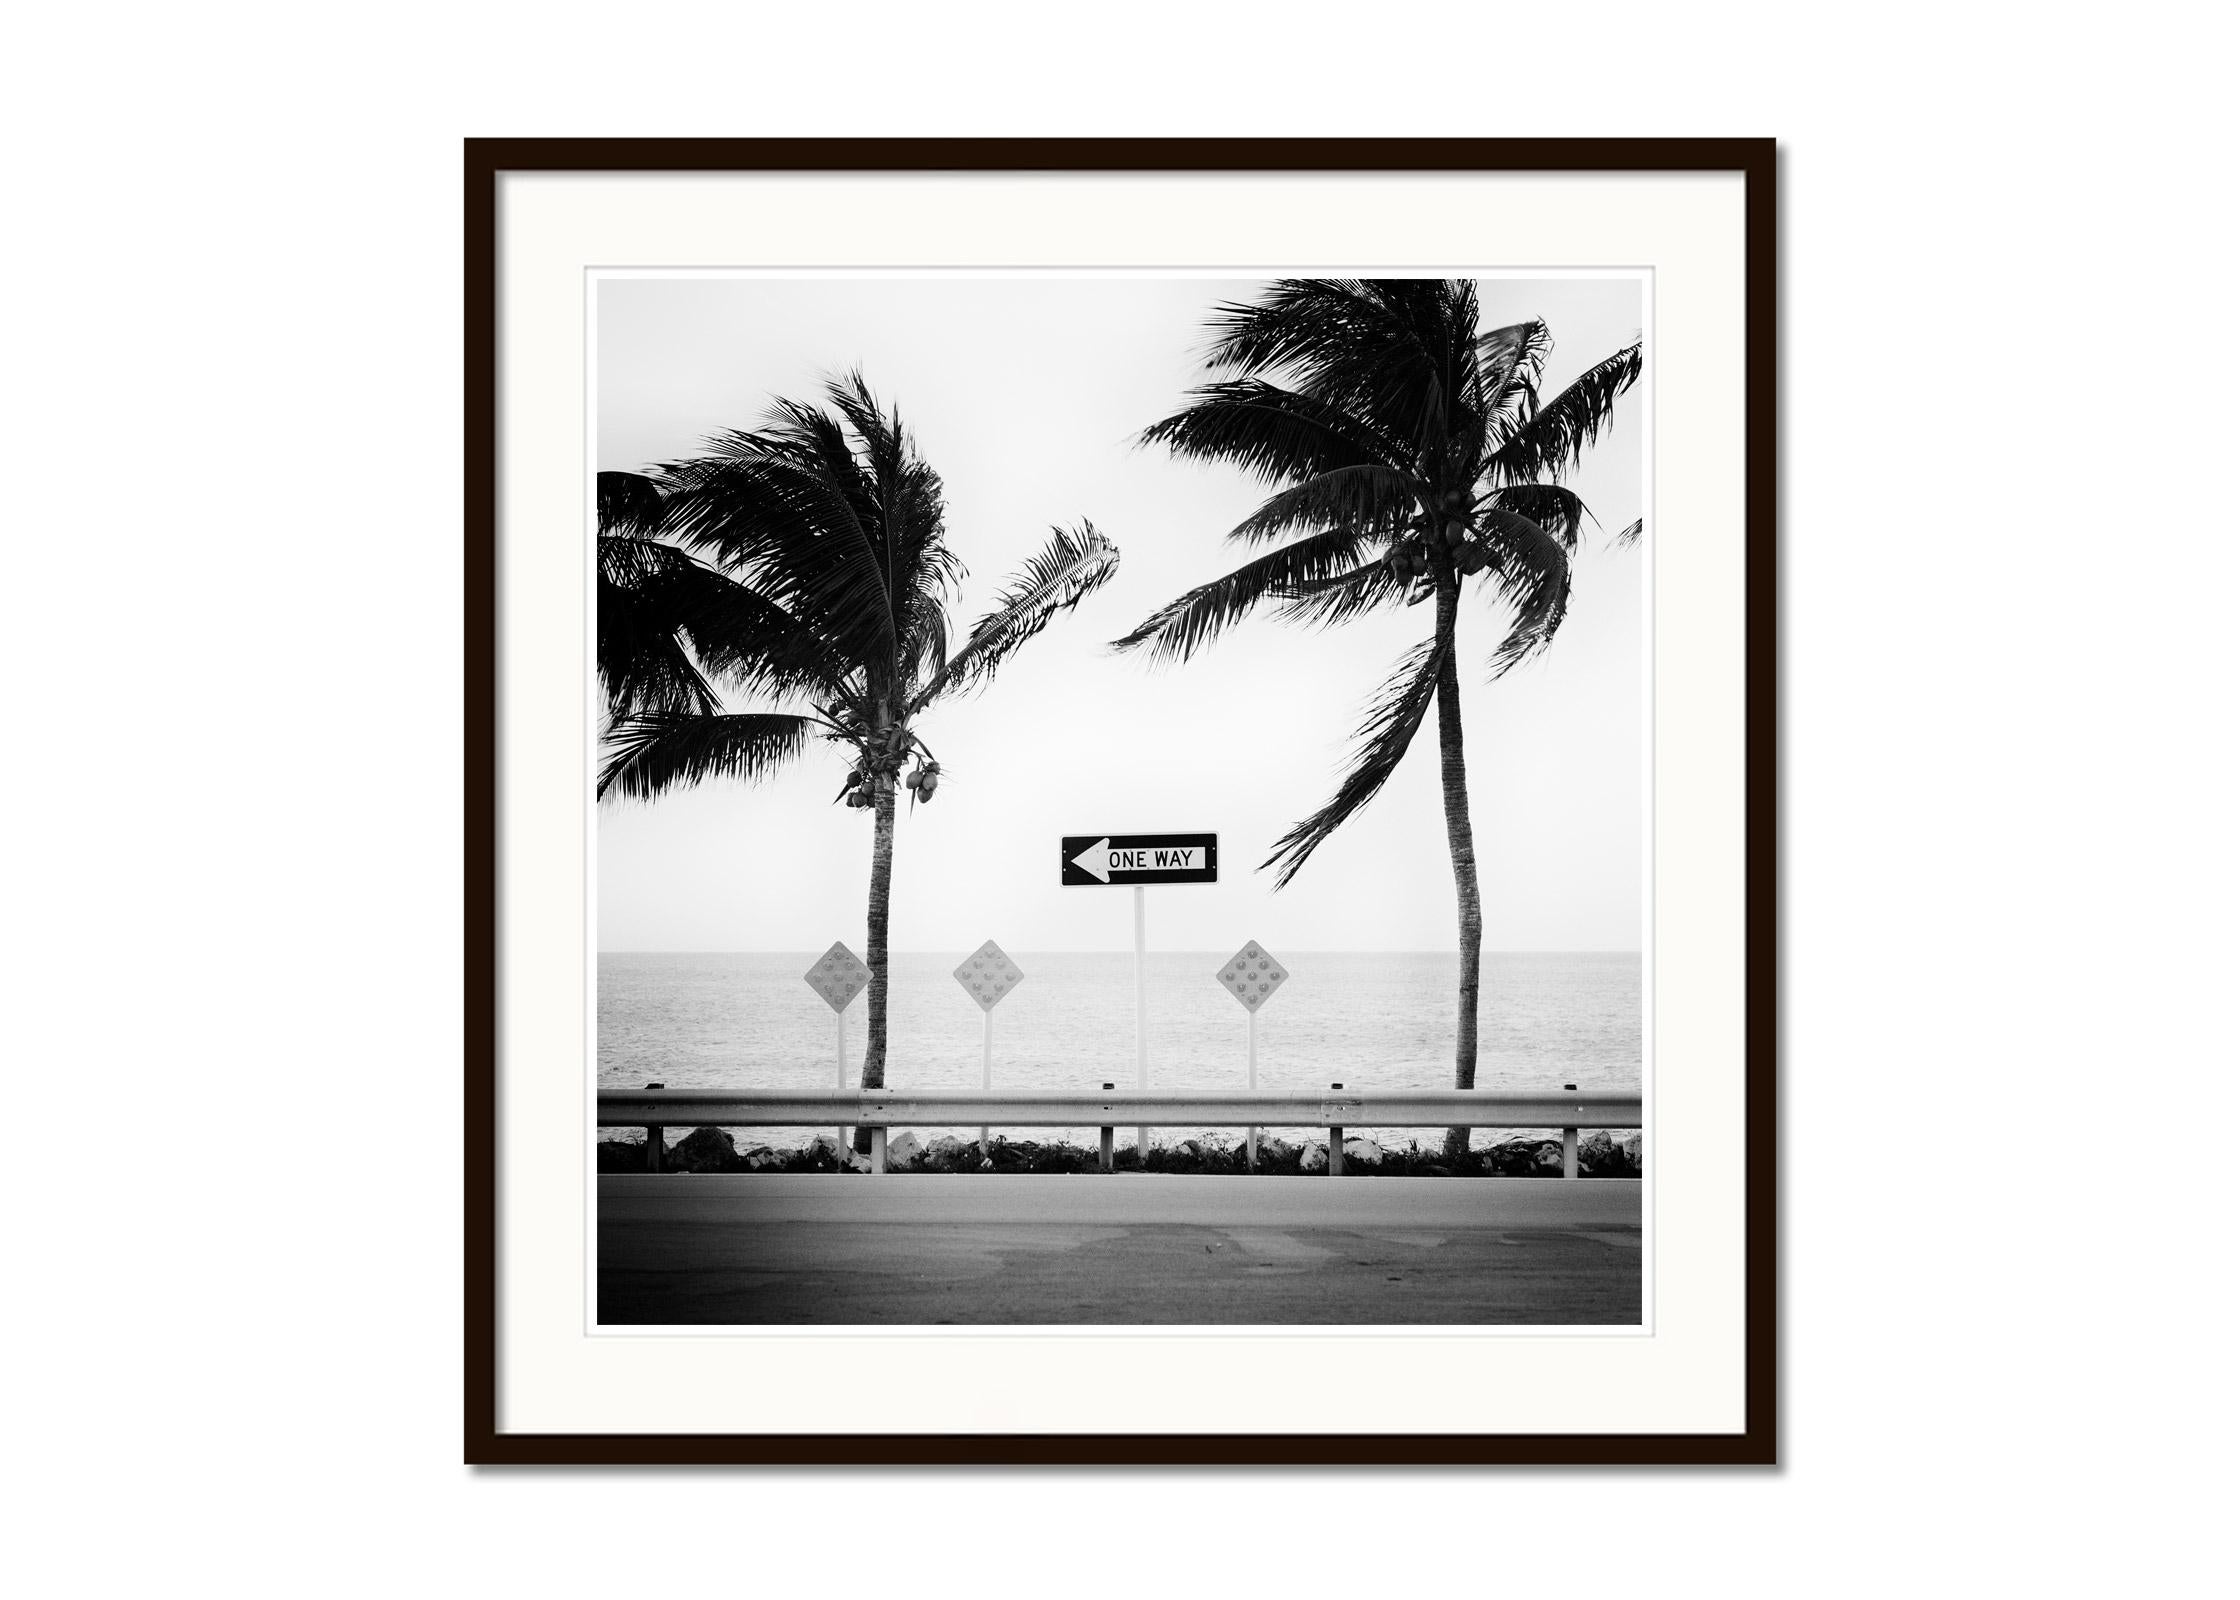 ONE WAY, Miami Beach, Florida, USA, black & white landscape photography print - Gray Landscape Photograph by Gerald Berghammer